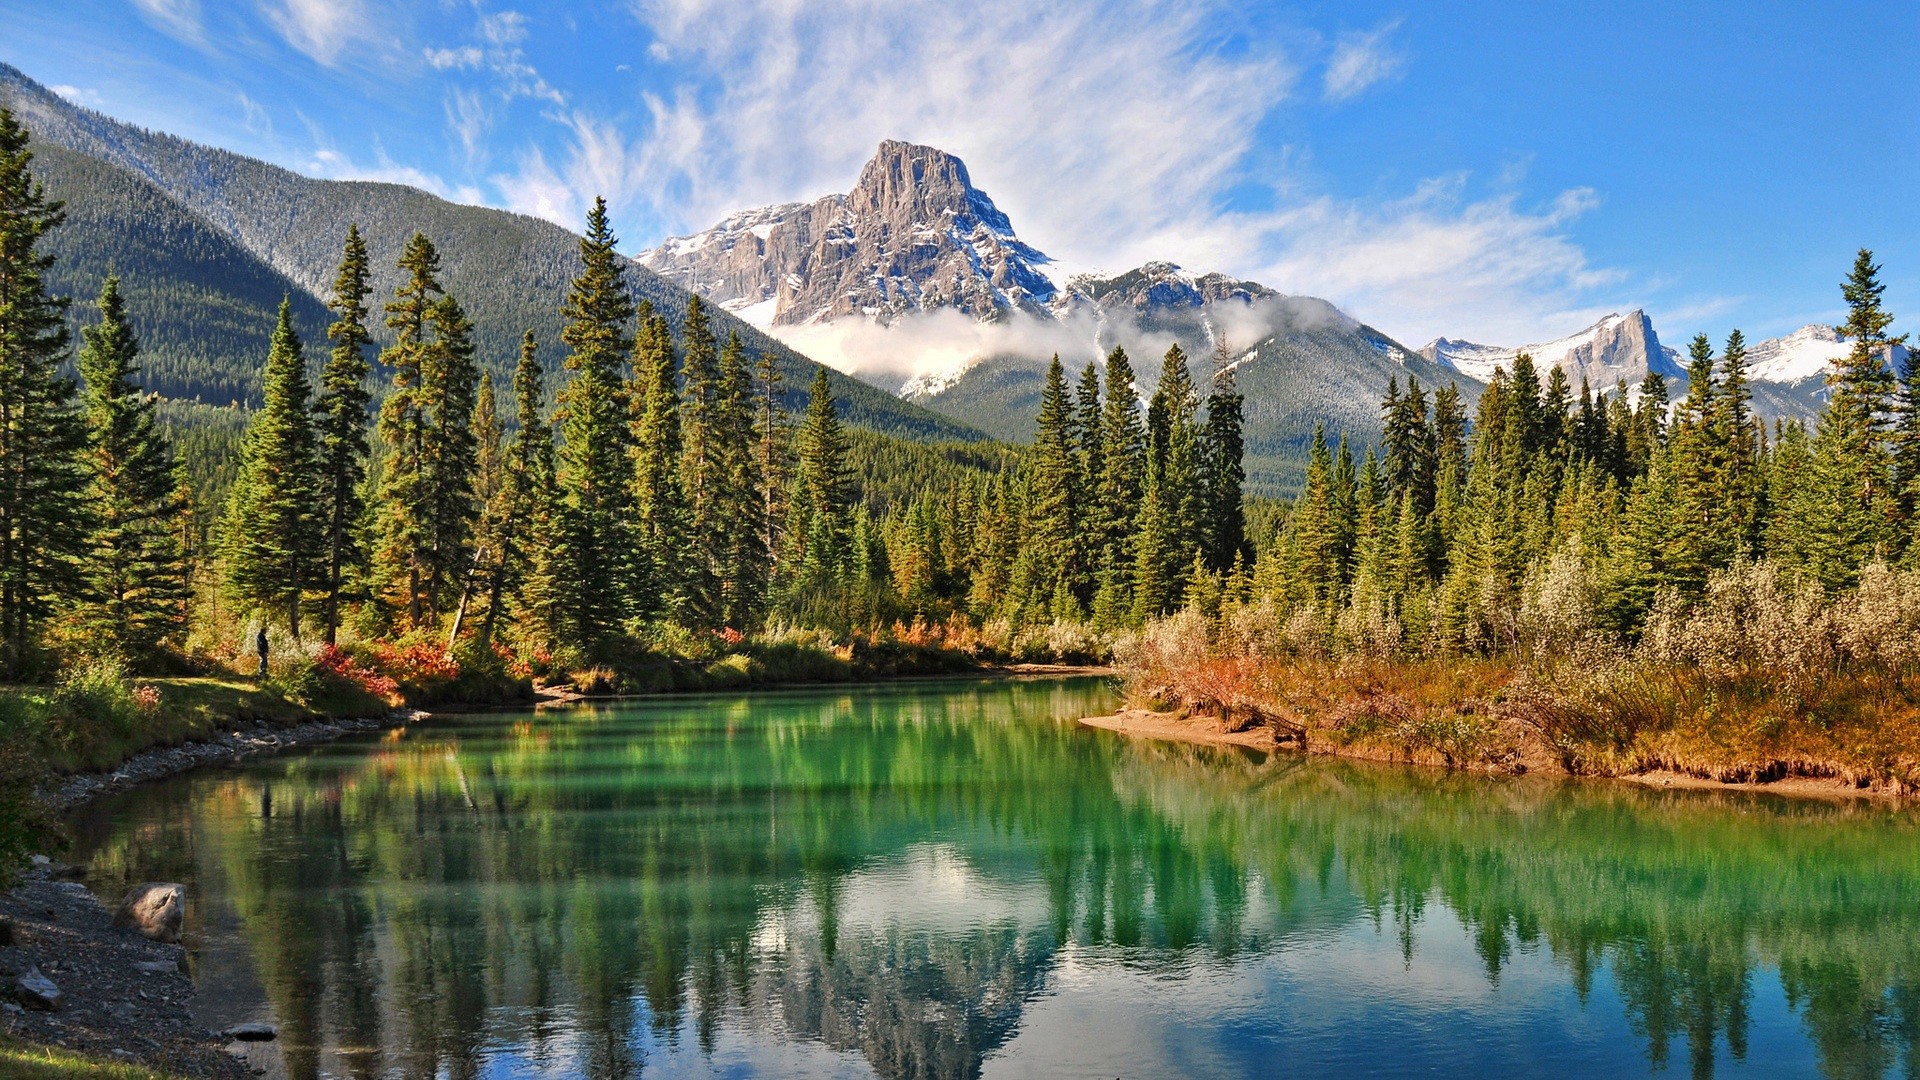 General 1920x1080 lake forest mountains Canada summer snowy peak green grass water clouds nature landscape river